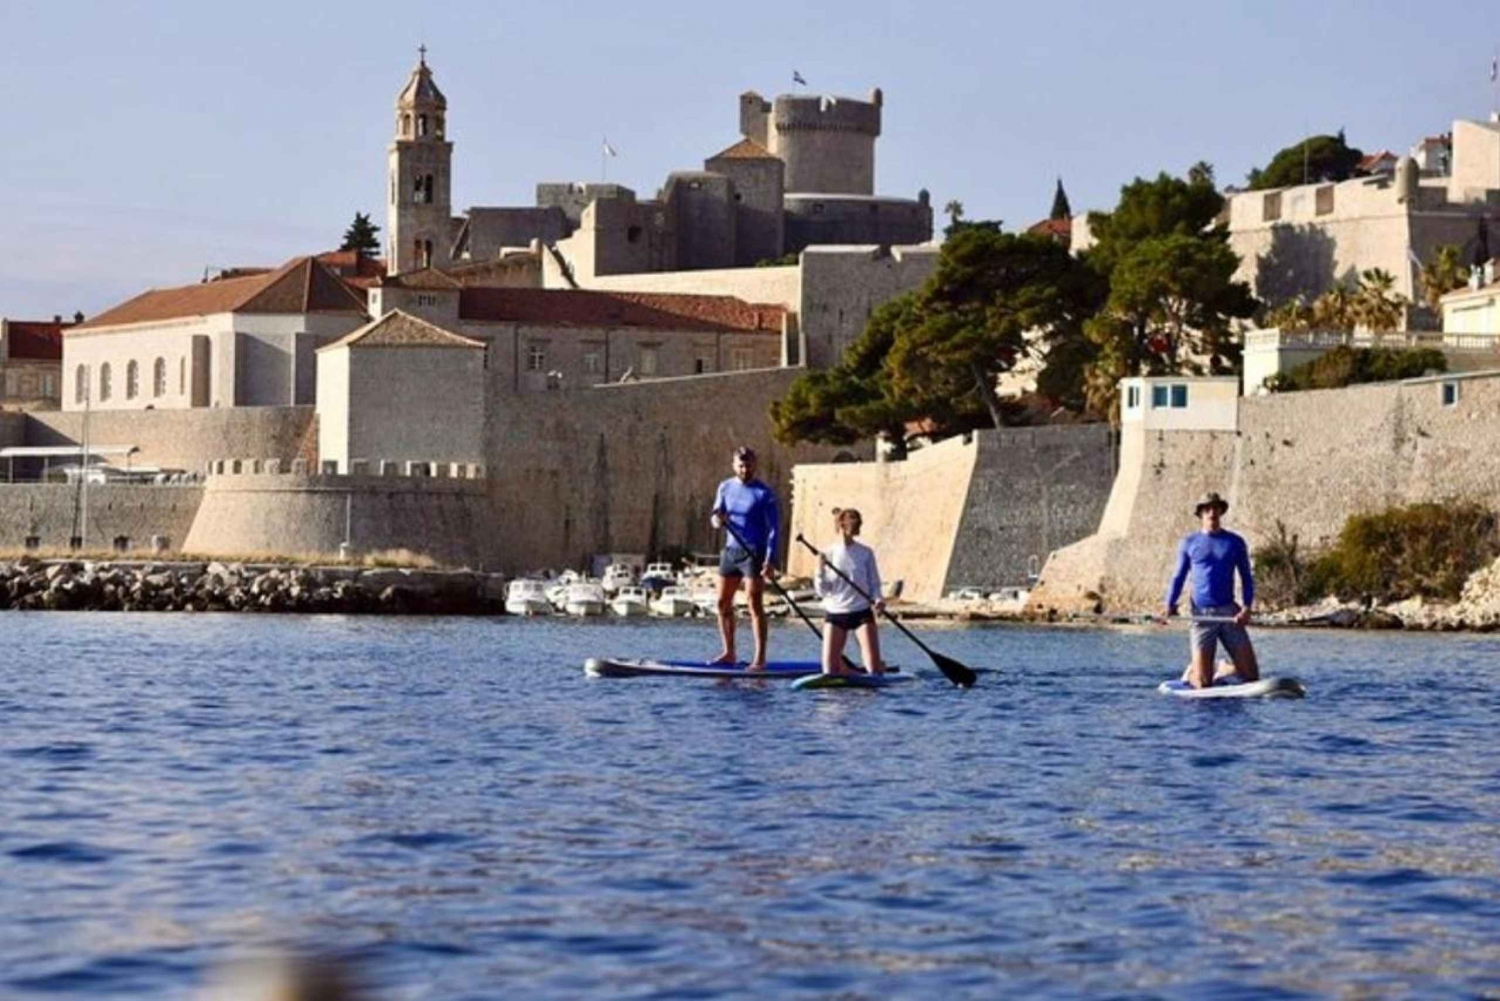 Paddleboarding in front of the Old Town